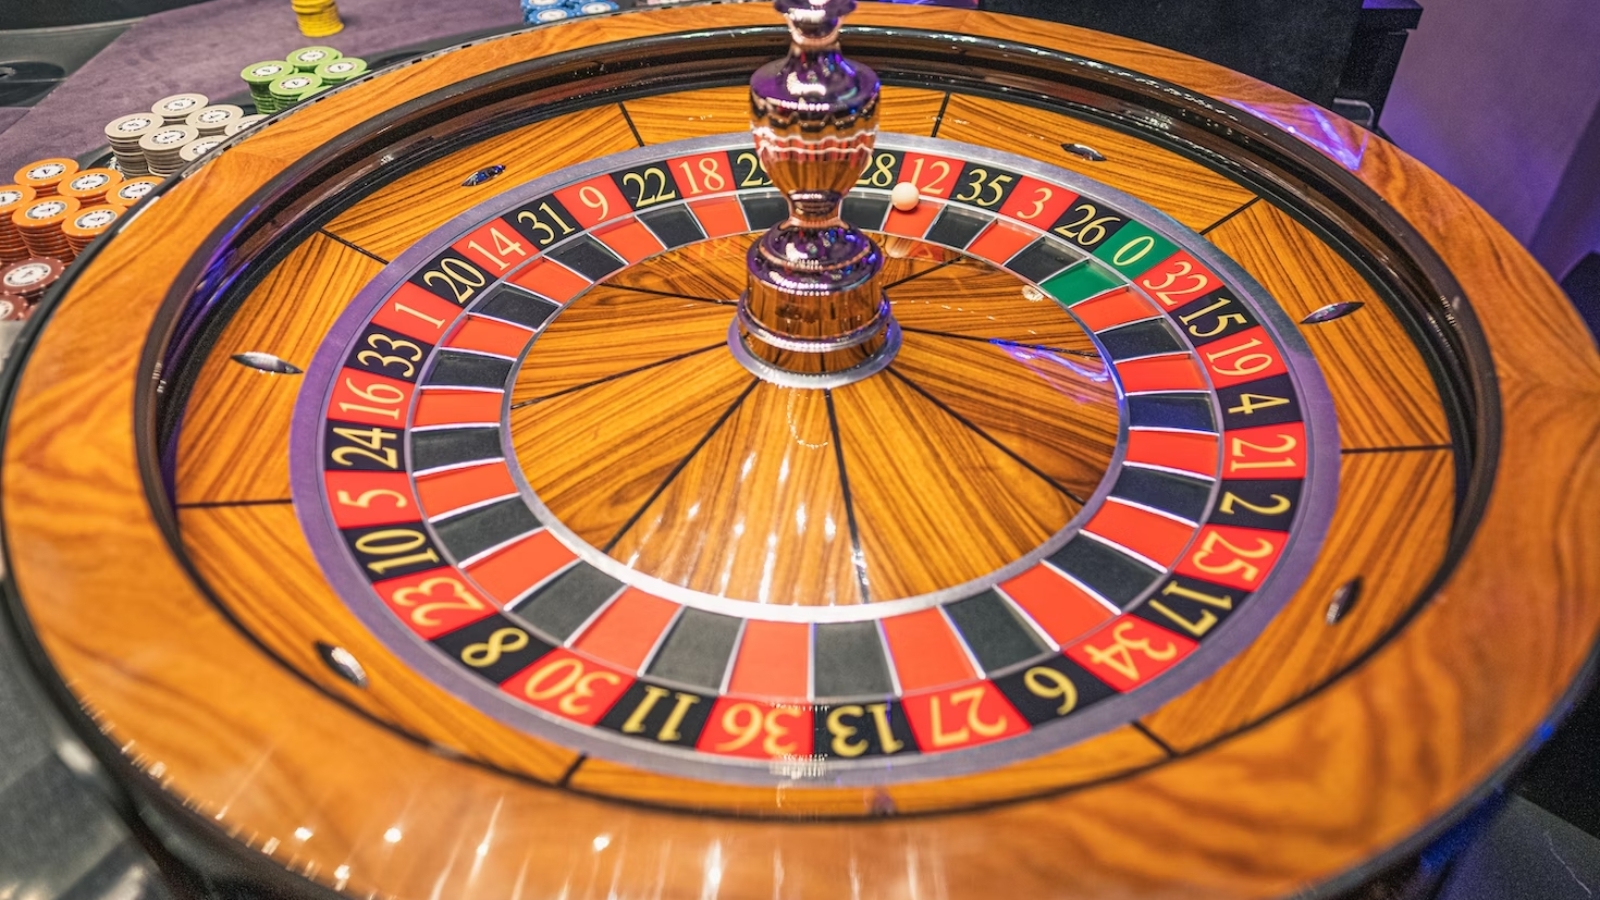 Roulette Etiquette: How to Behave at the Roulette Table and Online